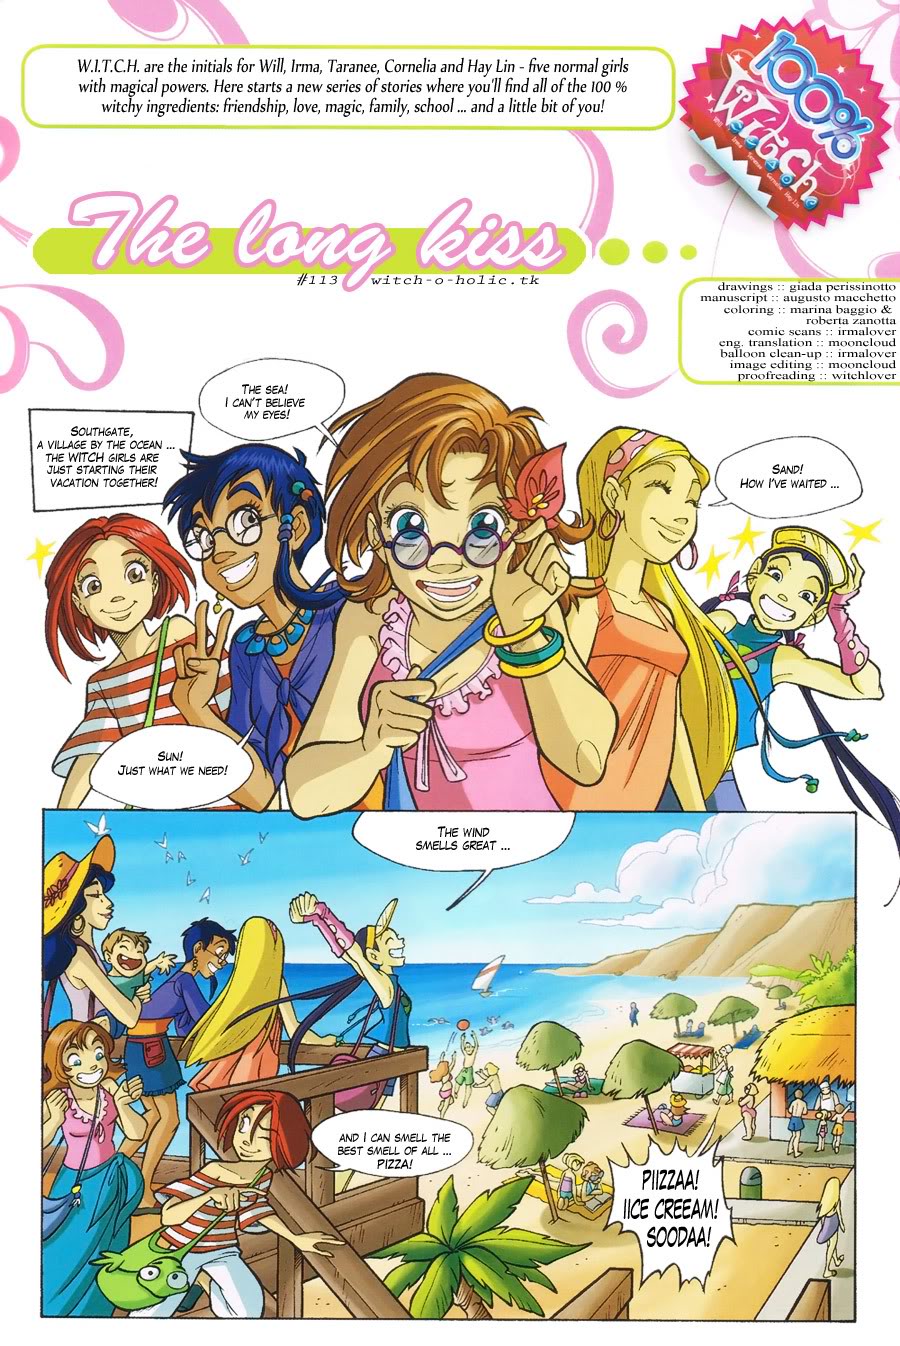 Read online W.i.t.c.h. comic -  Issue #113 - 1